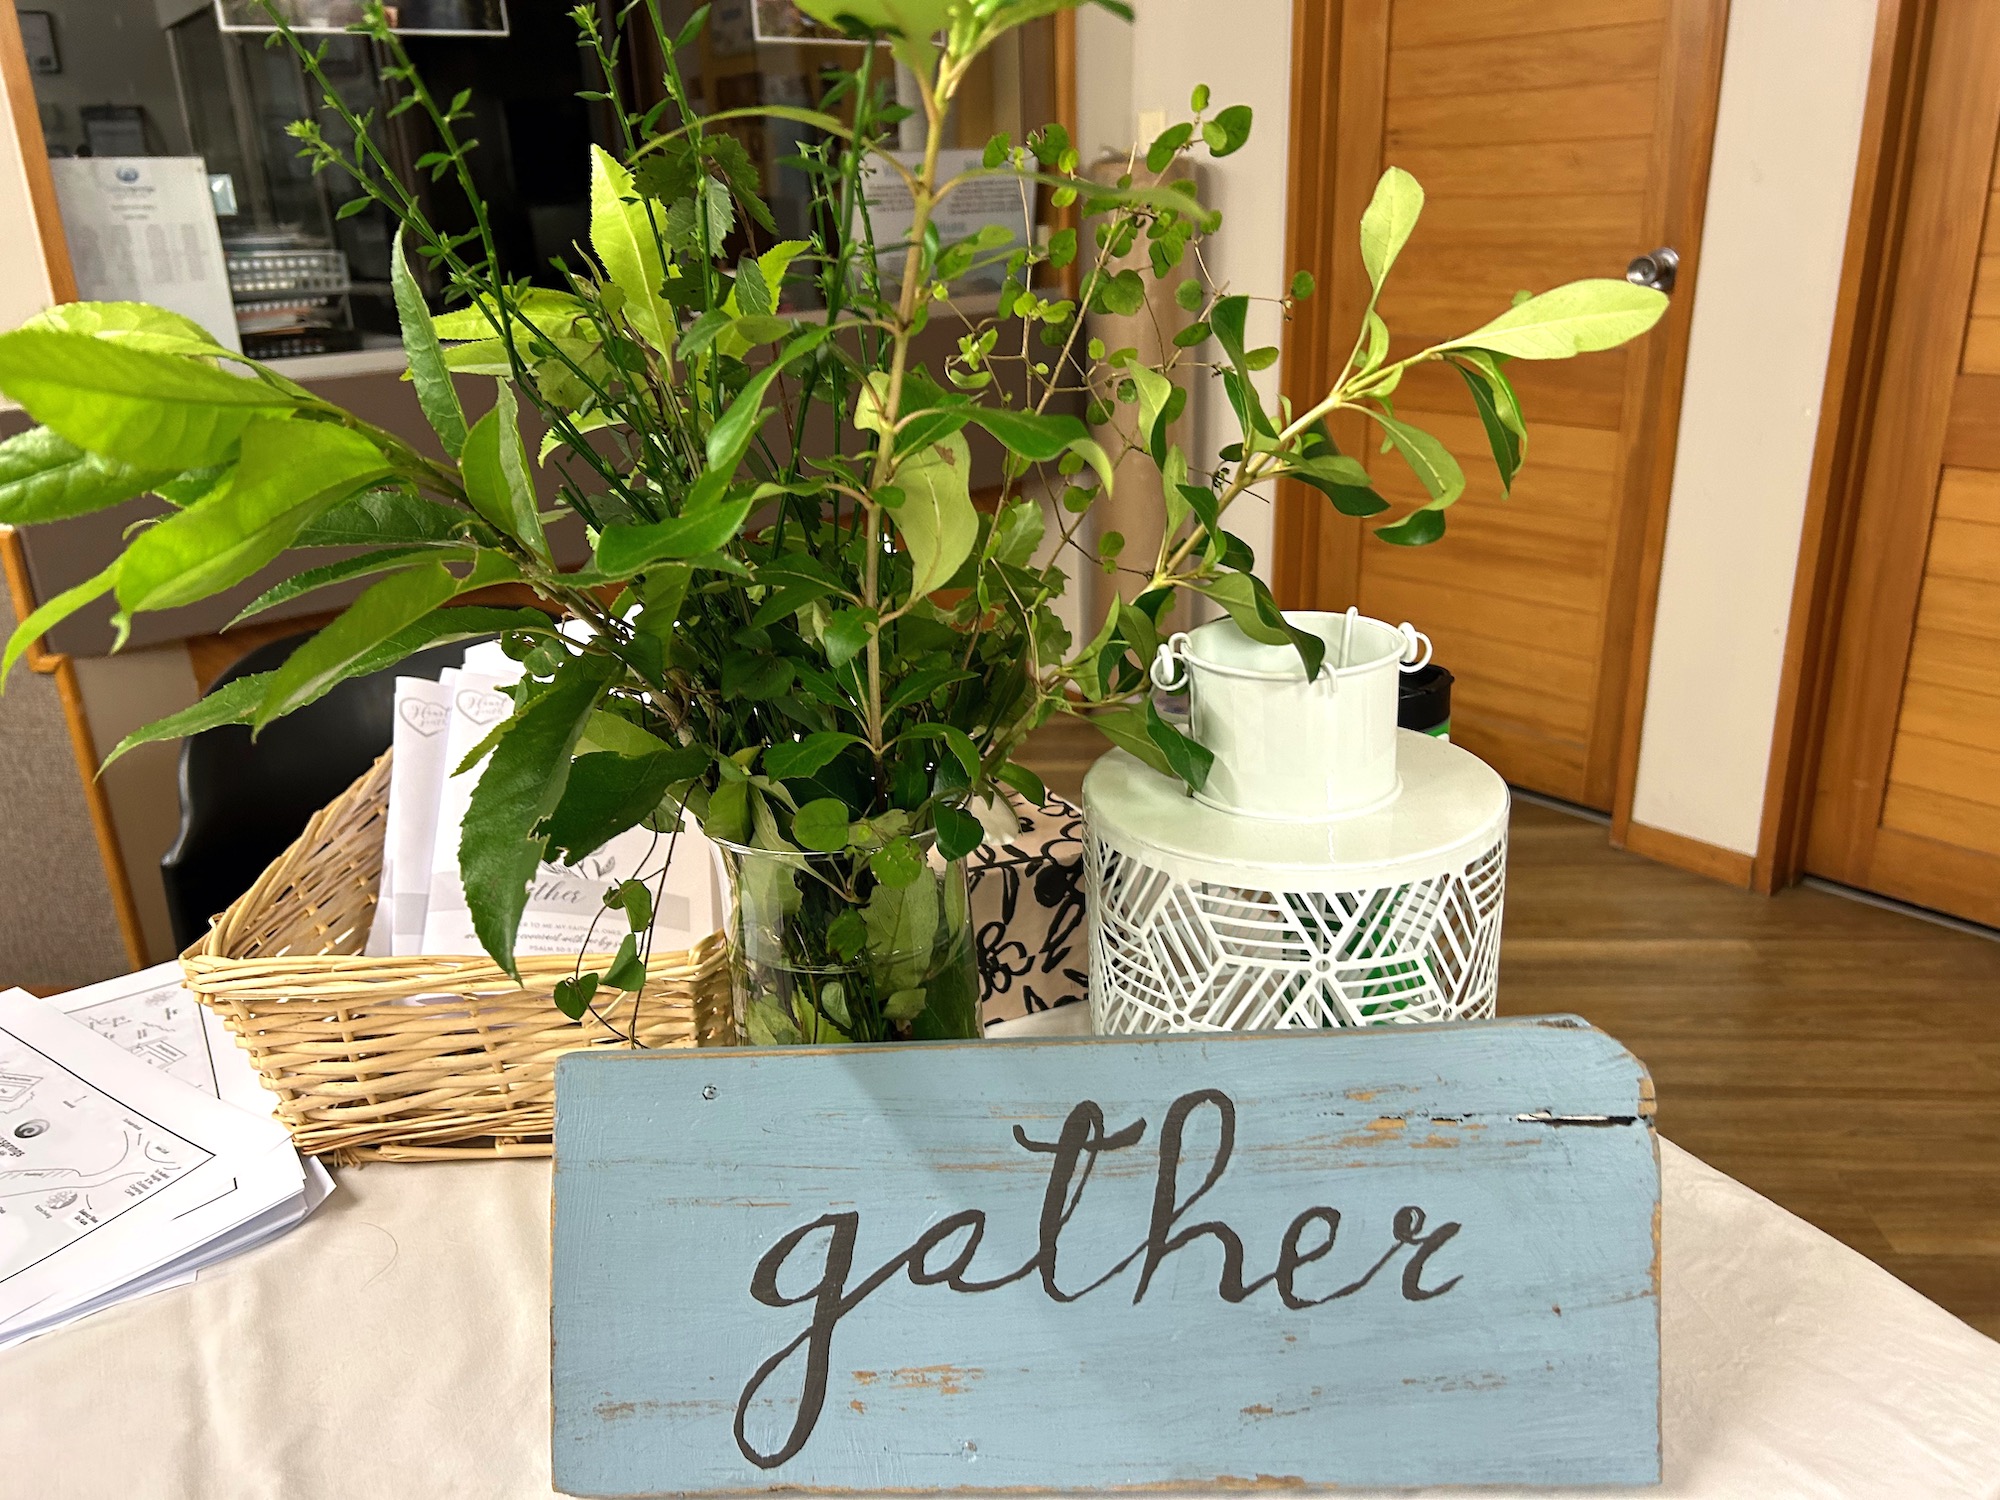 HEART South 2023 - 'Gather'